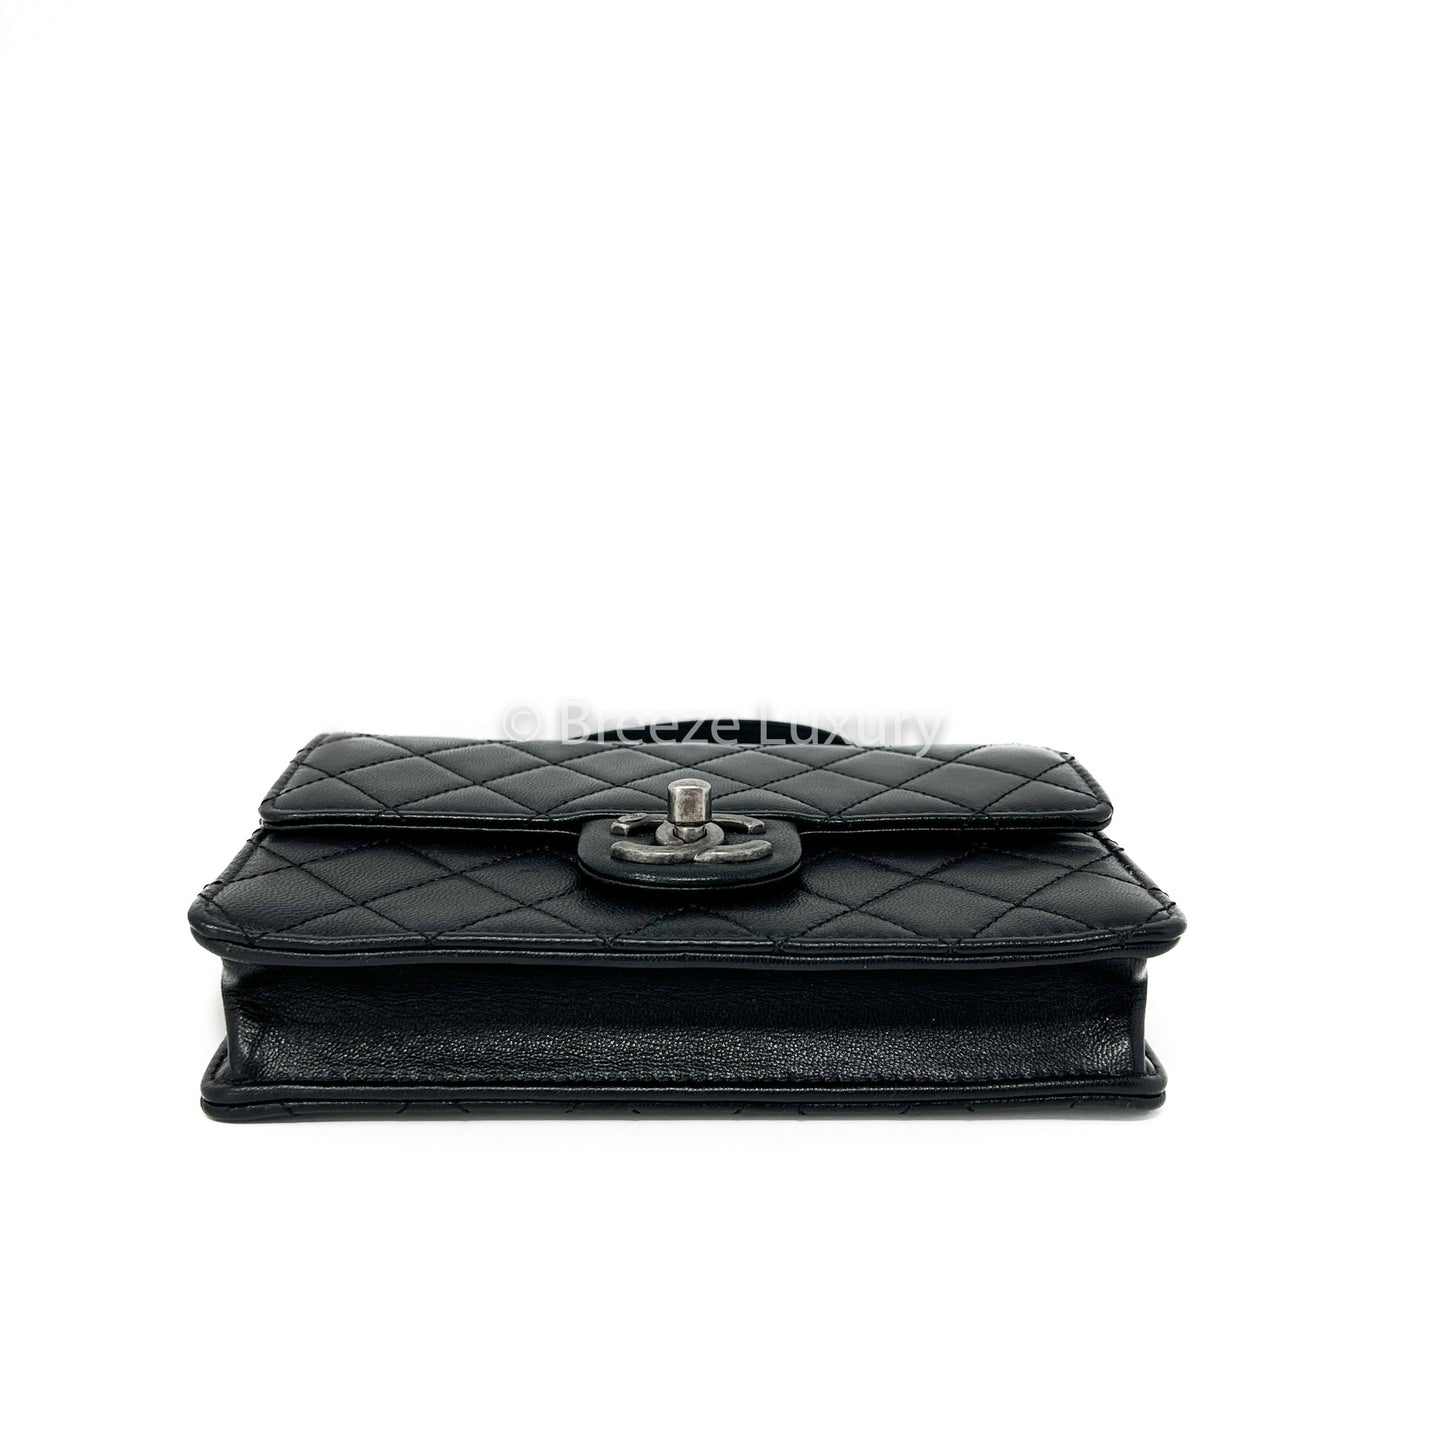 Chanel Goatskin Quilted Small Chic Pearls Flap Black